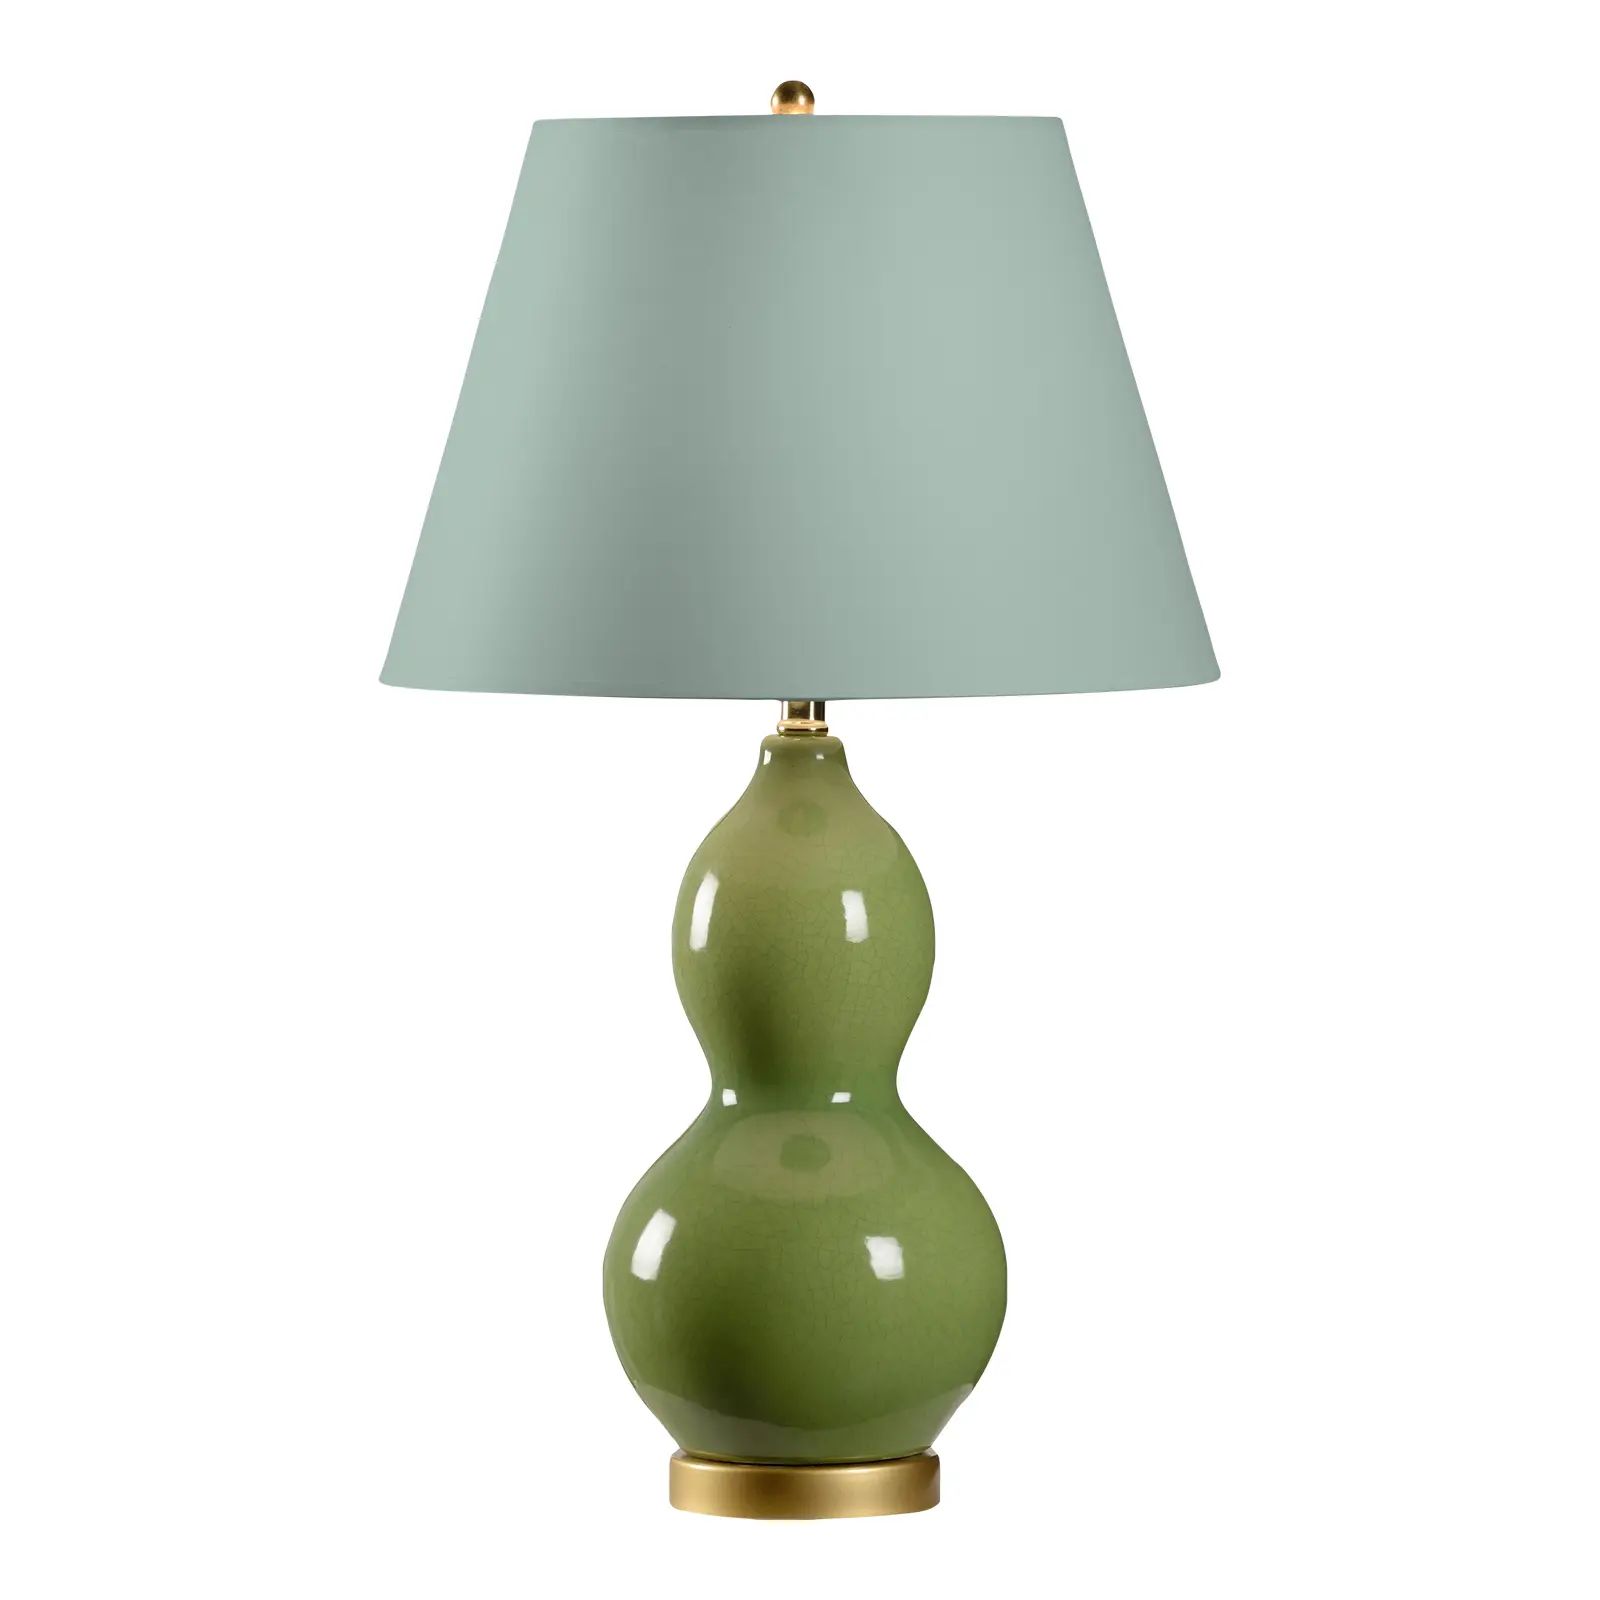 Casa Cosima Double Gourd Table Lamp, Green Craquelure Base with Palladian Blue Lamp Shade | Chairish